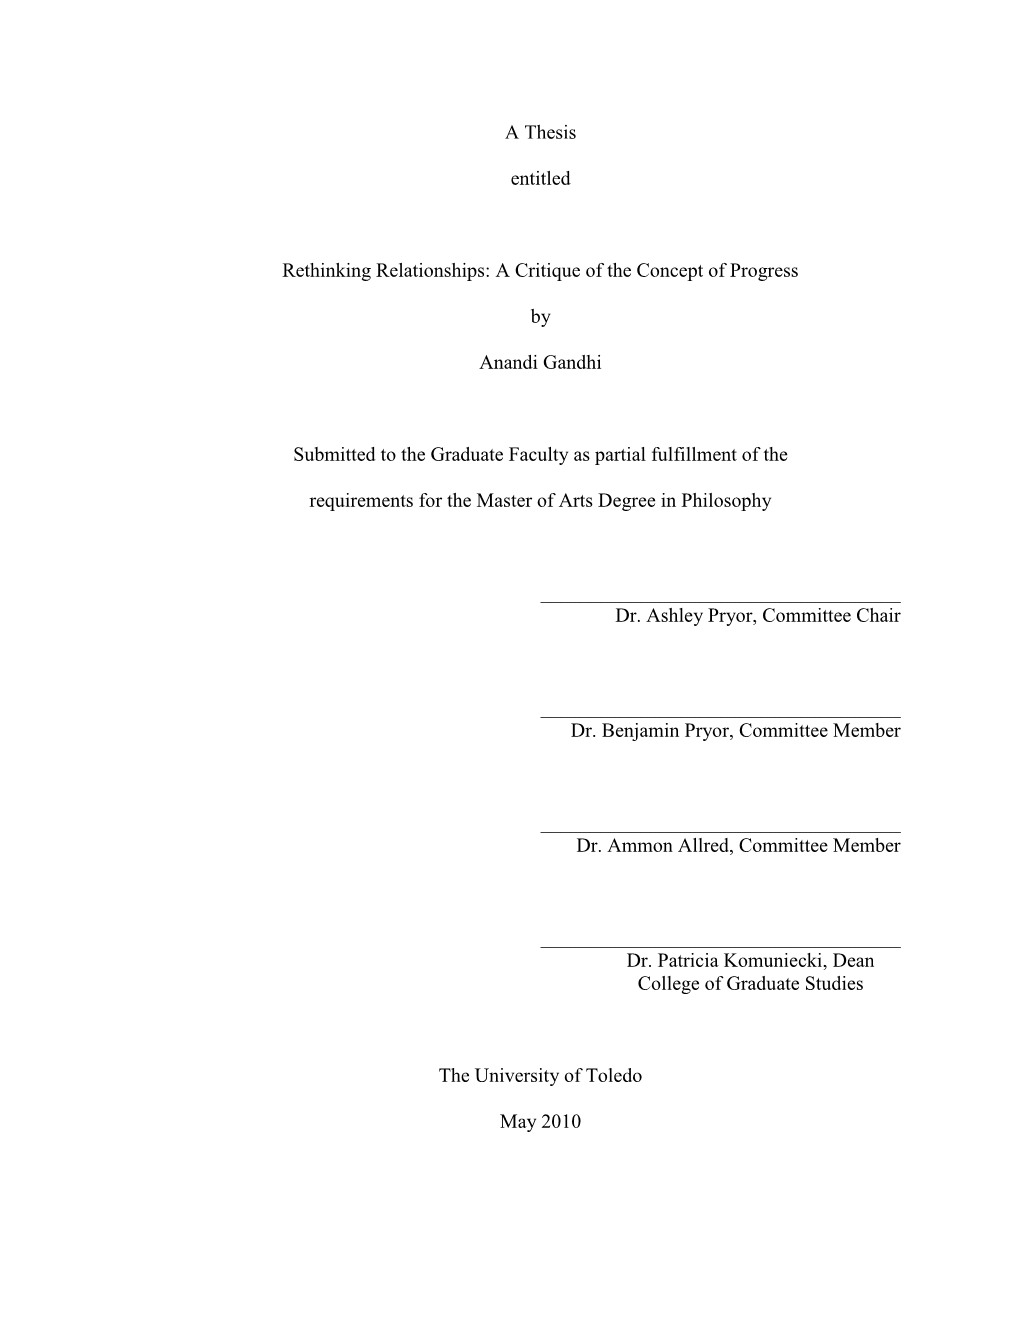 A Thesis Entitled Rethinking Relationships: a Critique of the Concept of Progress by Anandi Gandhi Submitted to the Graduate